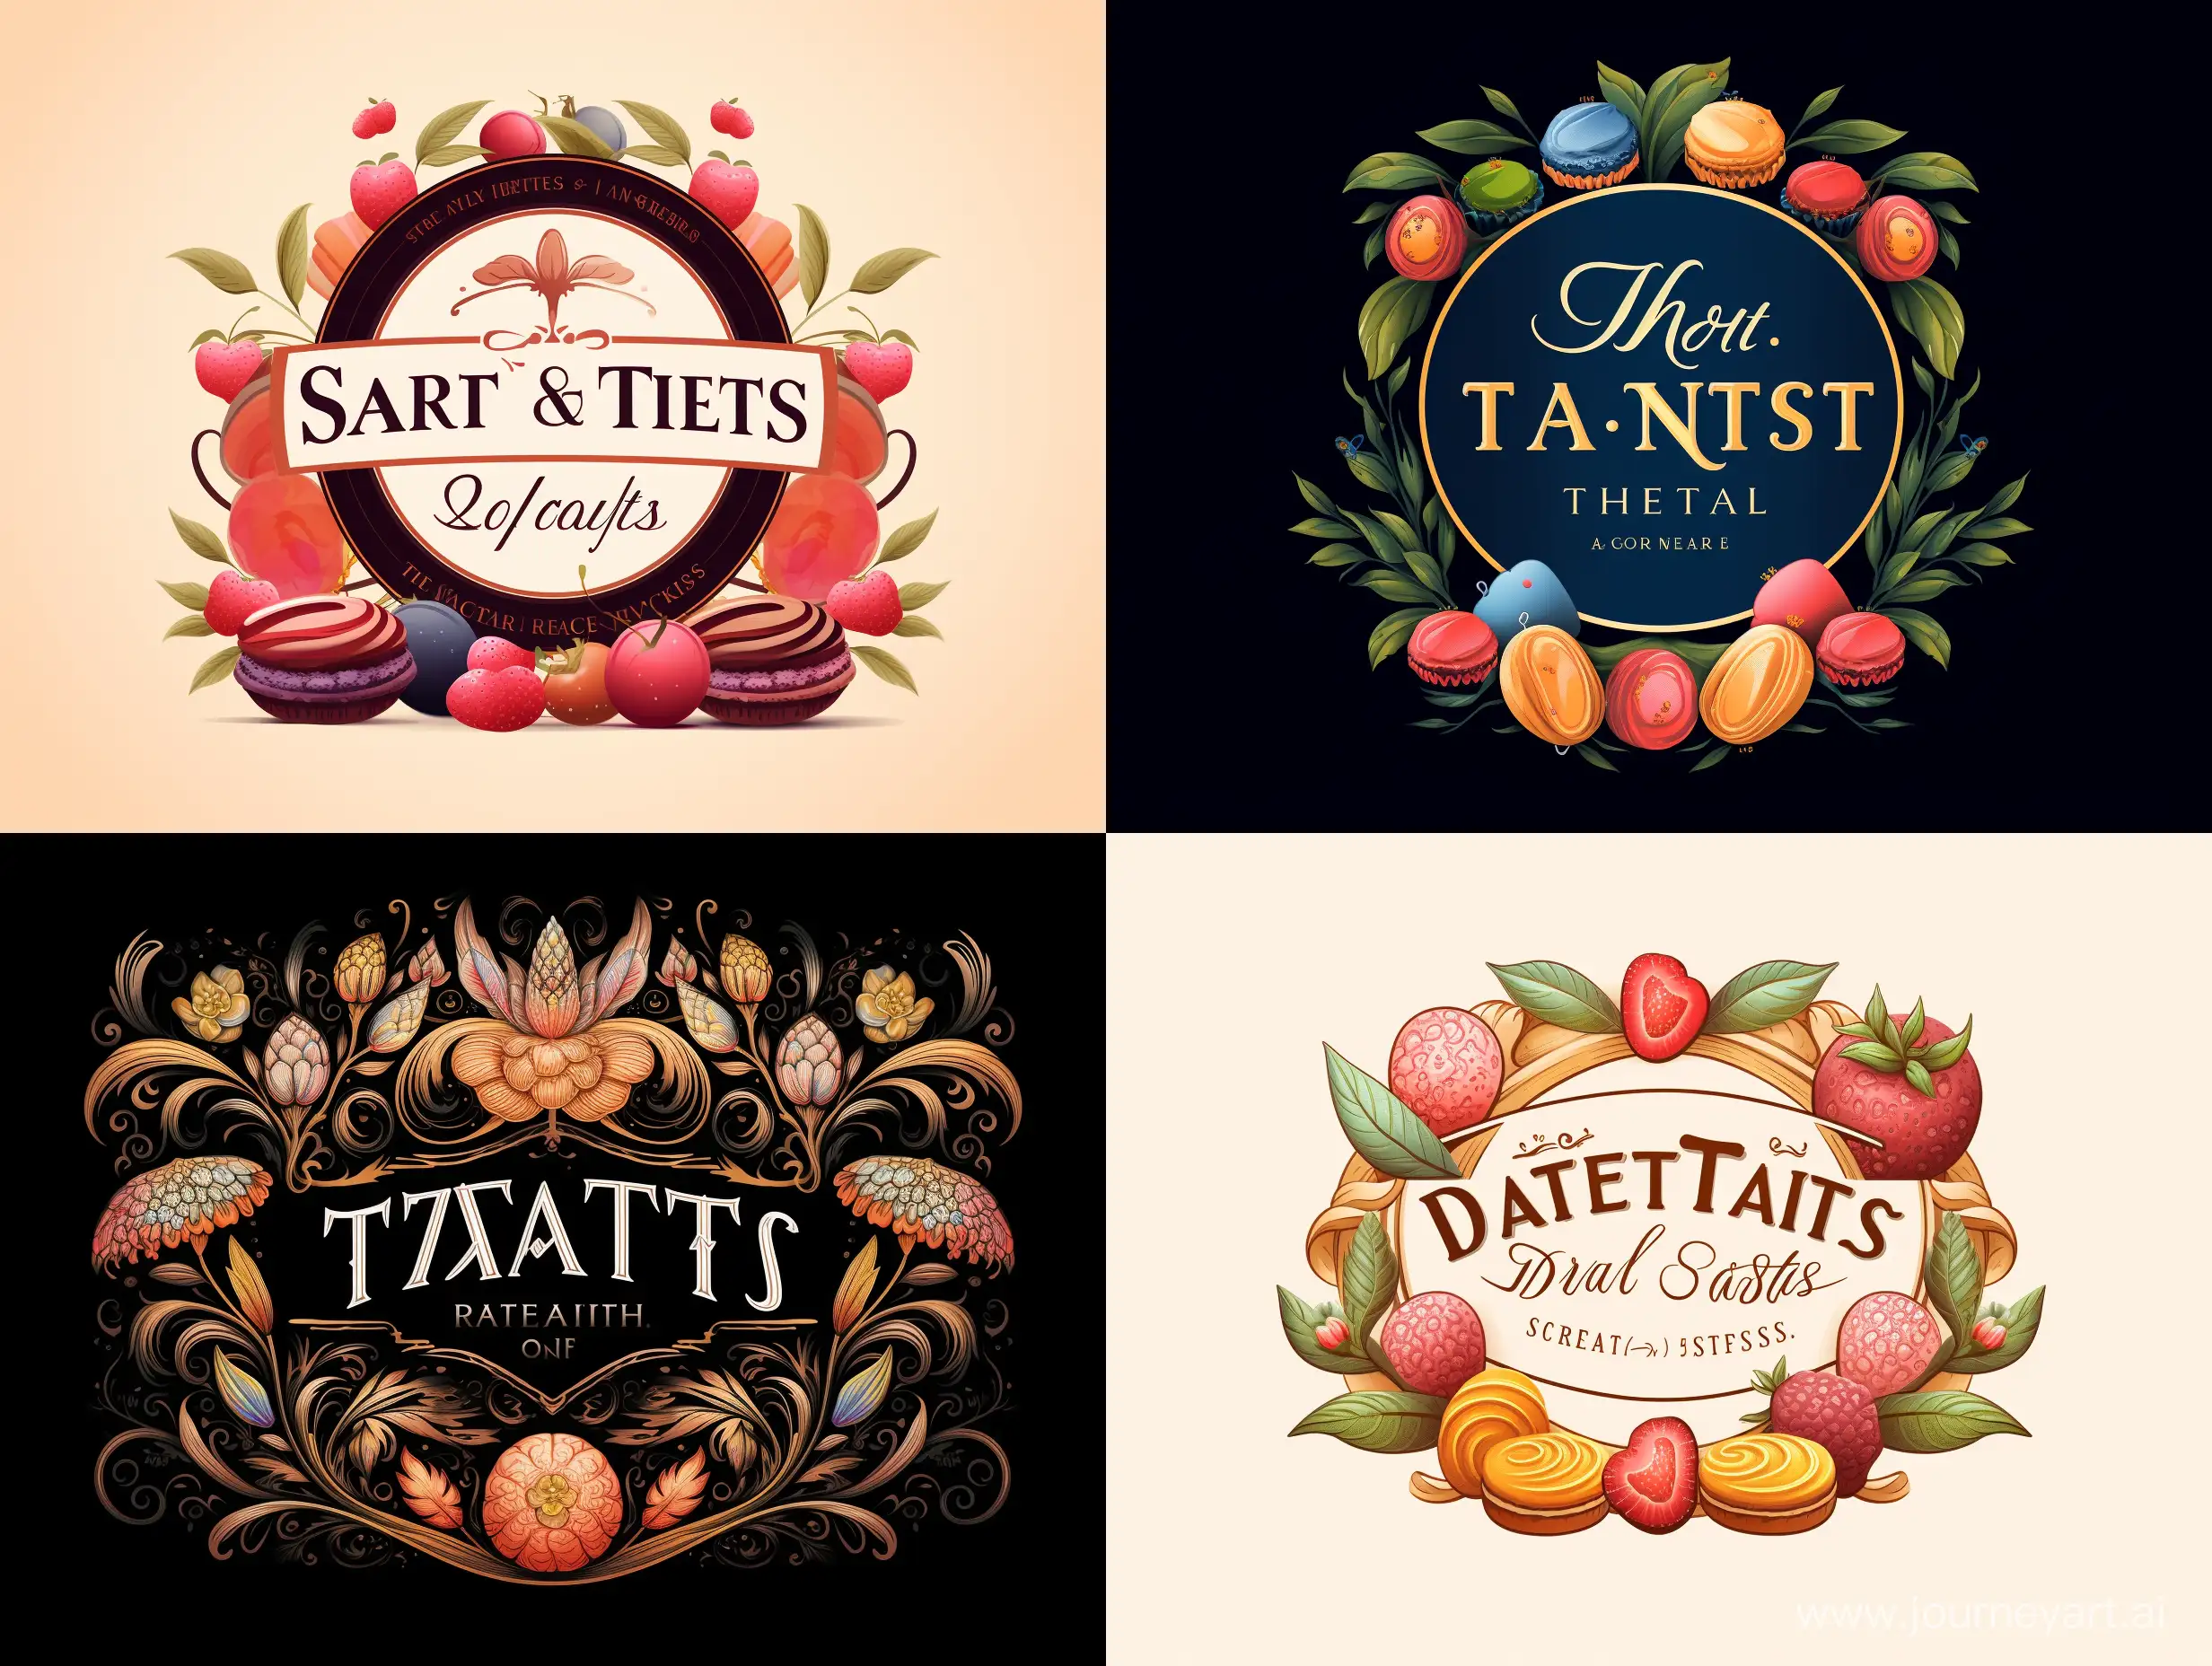 a professional logo about a tartes and patisserie and the name of it sweet tarts